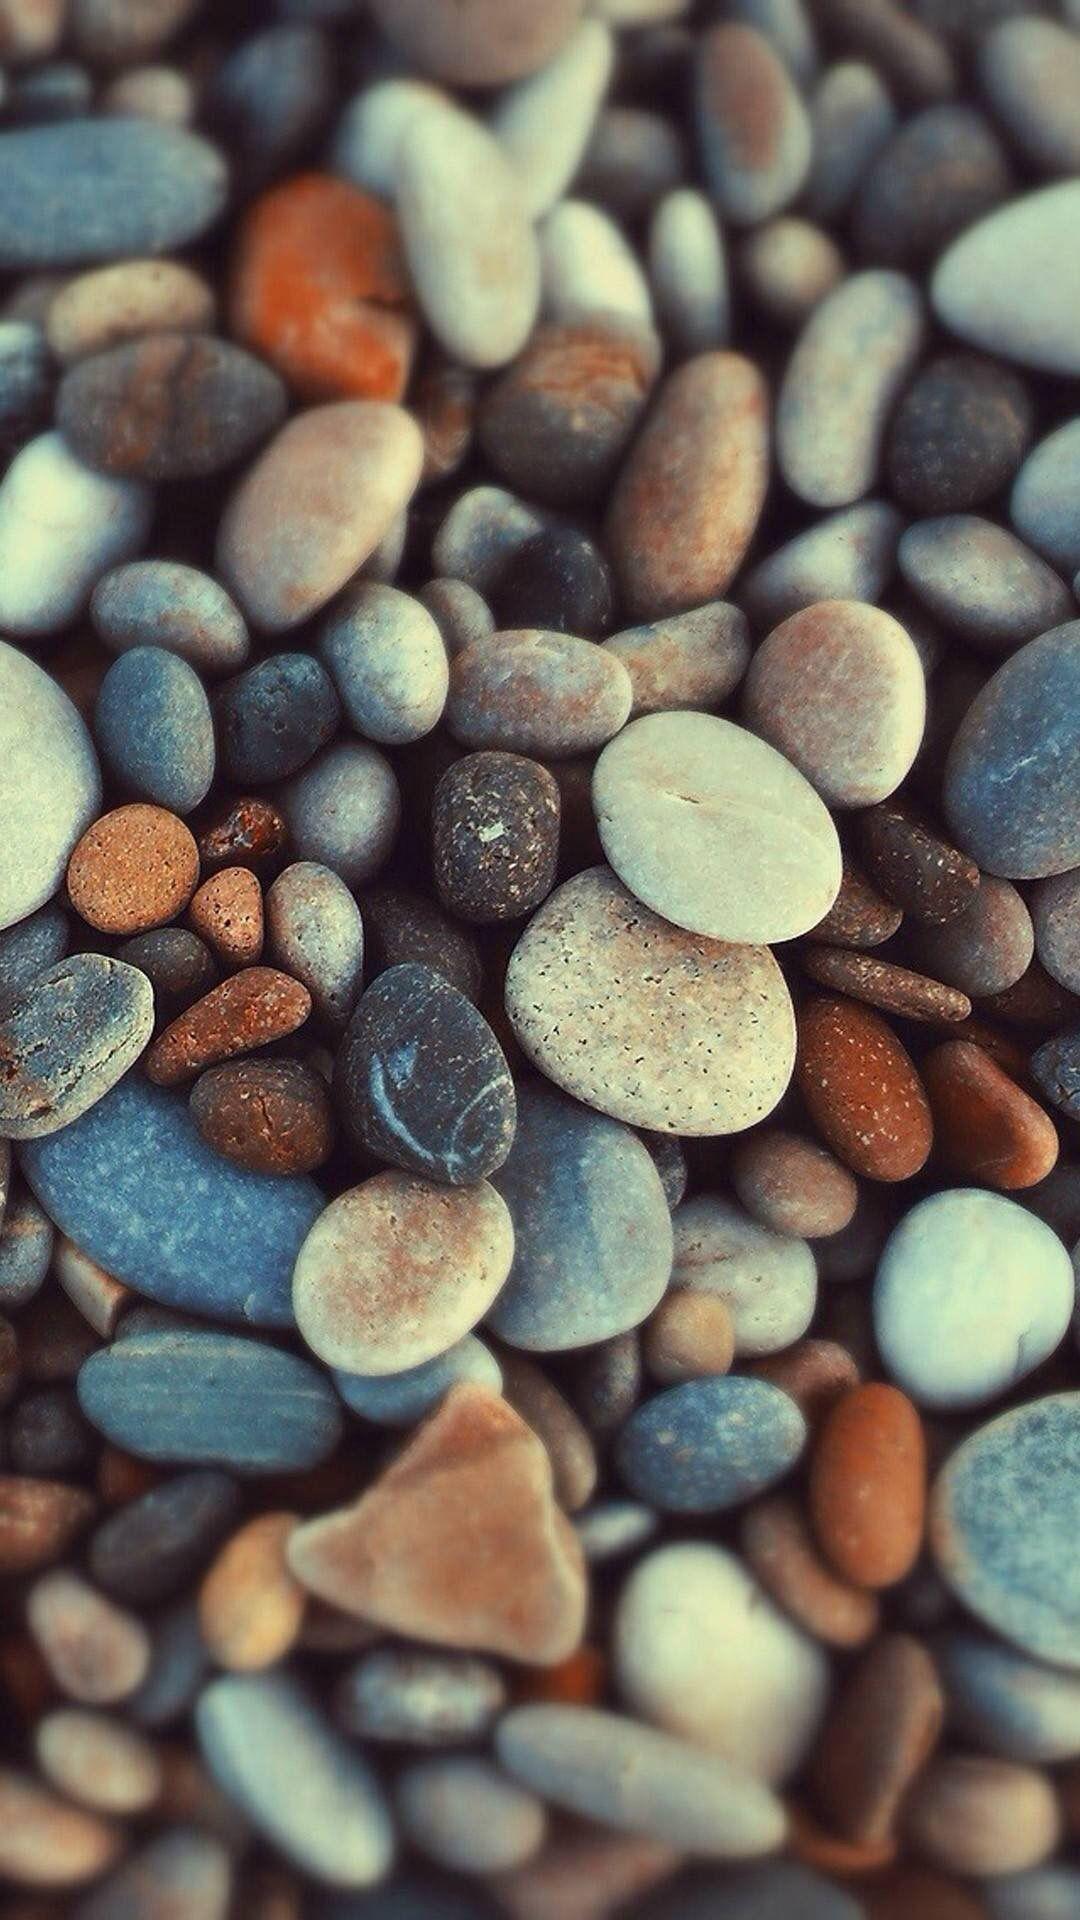 Stone Iphone Wallpapers Top Free Stone Iphone Backgrounds Wallpaperaccess